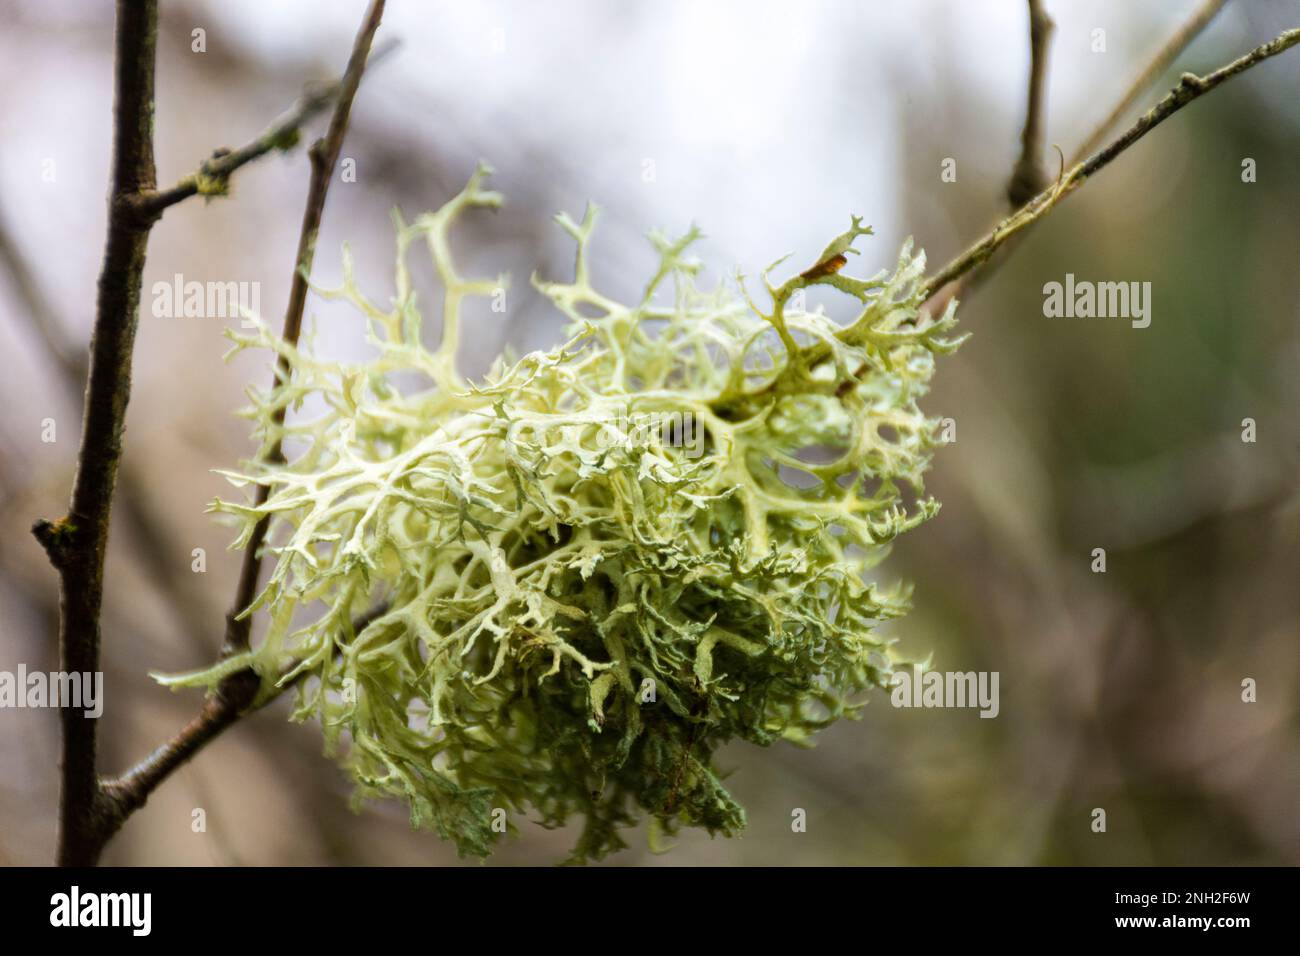 Letharia vulpina, a species of fruticose lichen fungus in the family Parmeliaceae, commonly known as the wolf lichen. Corticolous types of lichens liv Stock Photo